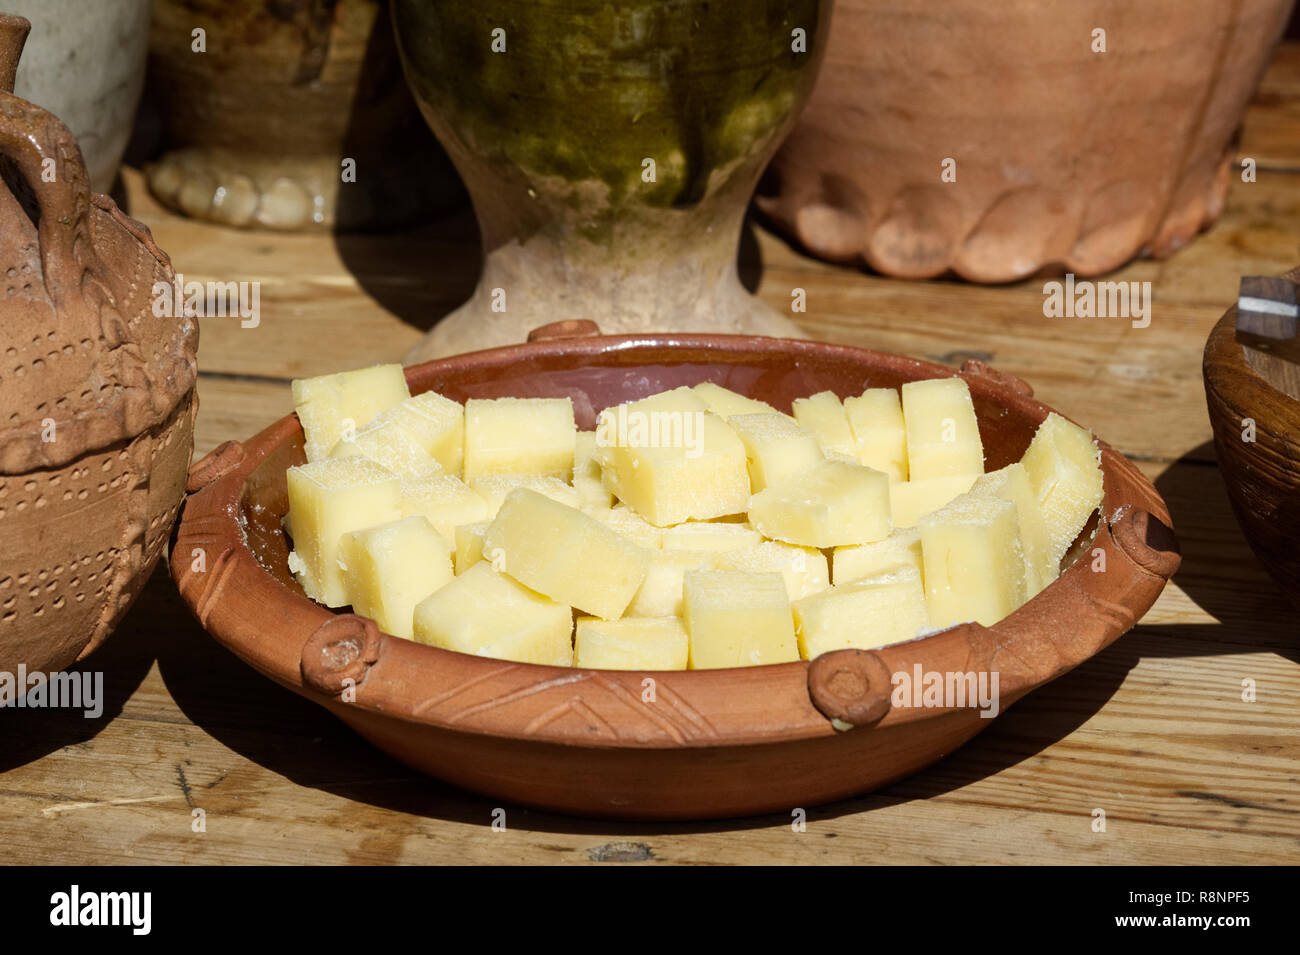 Medieval banquet cheese in a bowl. Stock Photo